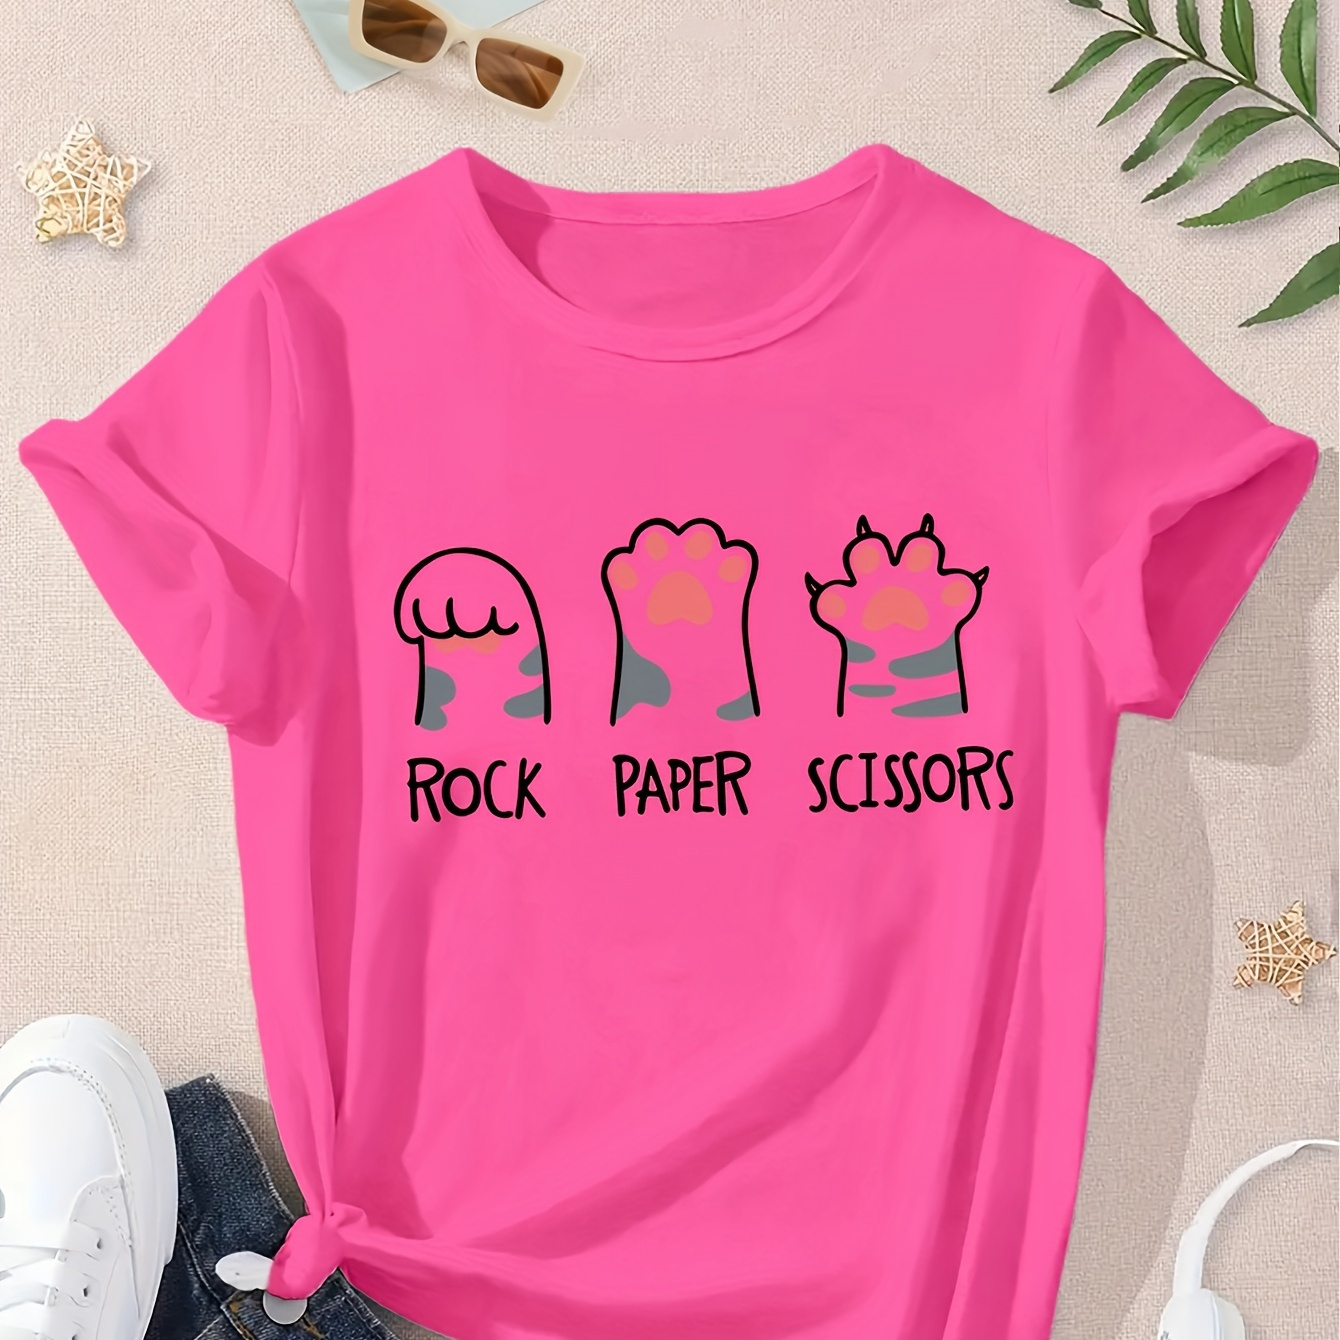 

Rock Paper Scissors And Cartoon Cat Hands Graphic Print, Girls' Casual Crew Neck Short Sleeve T-shirts, Comfy Top Clothes For Spring And Summer For Outdoor Activities